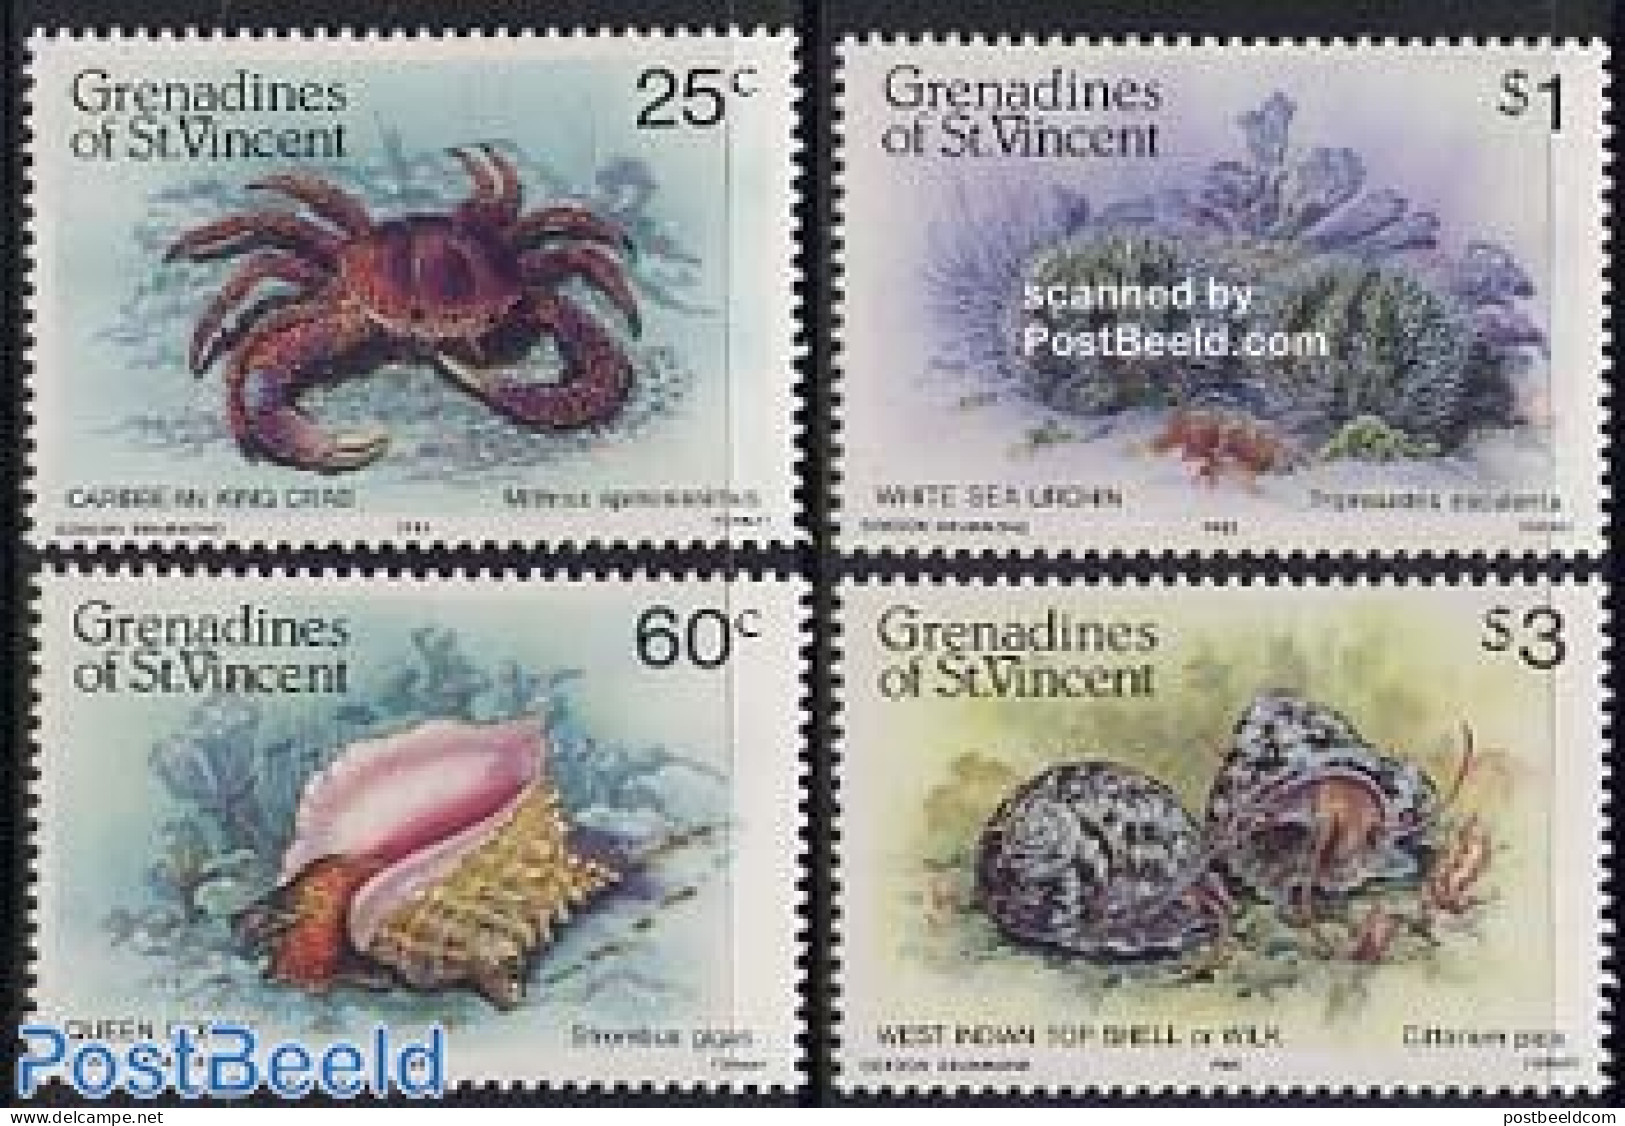 Saint Vincent & The Grenadines 1985 Marine Life 4v, Mint NH, Nature - Shells & Crustaceans - Crabs And Lobsters - Meereswelt